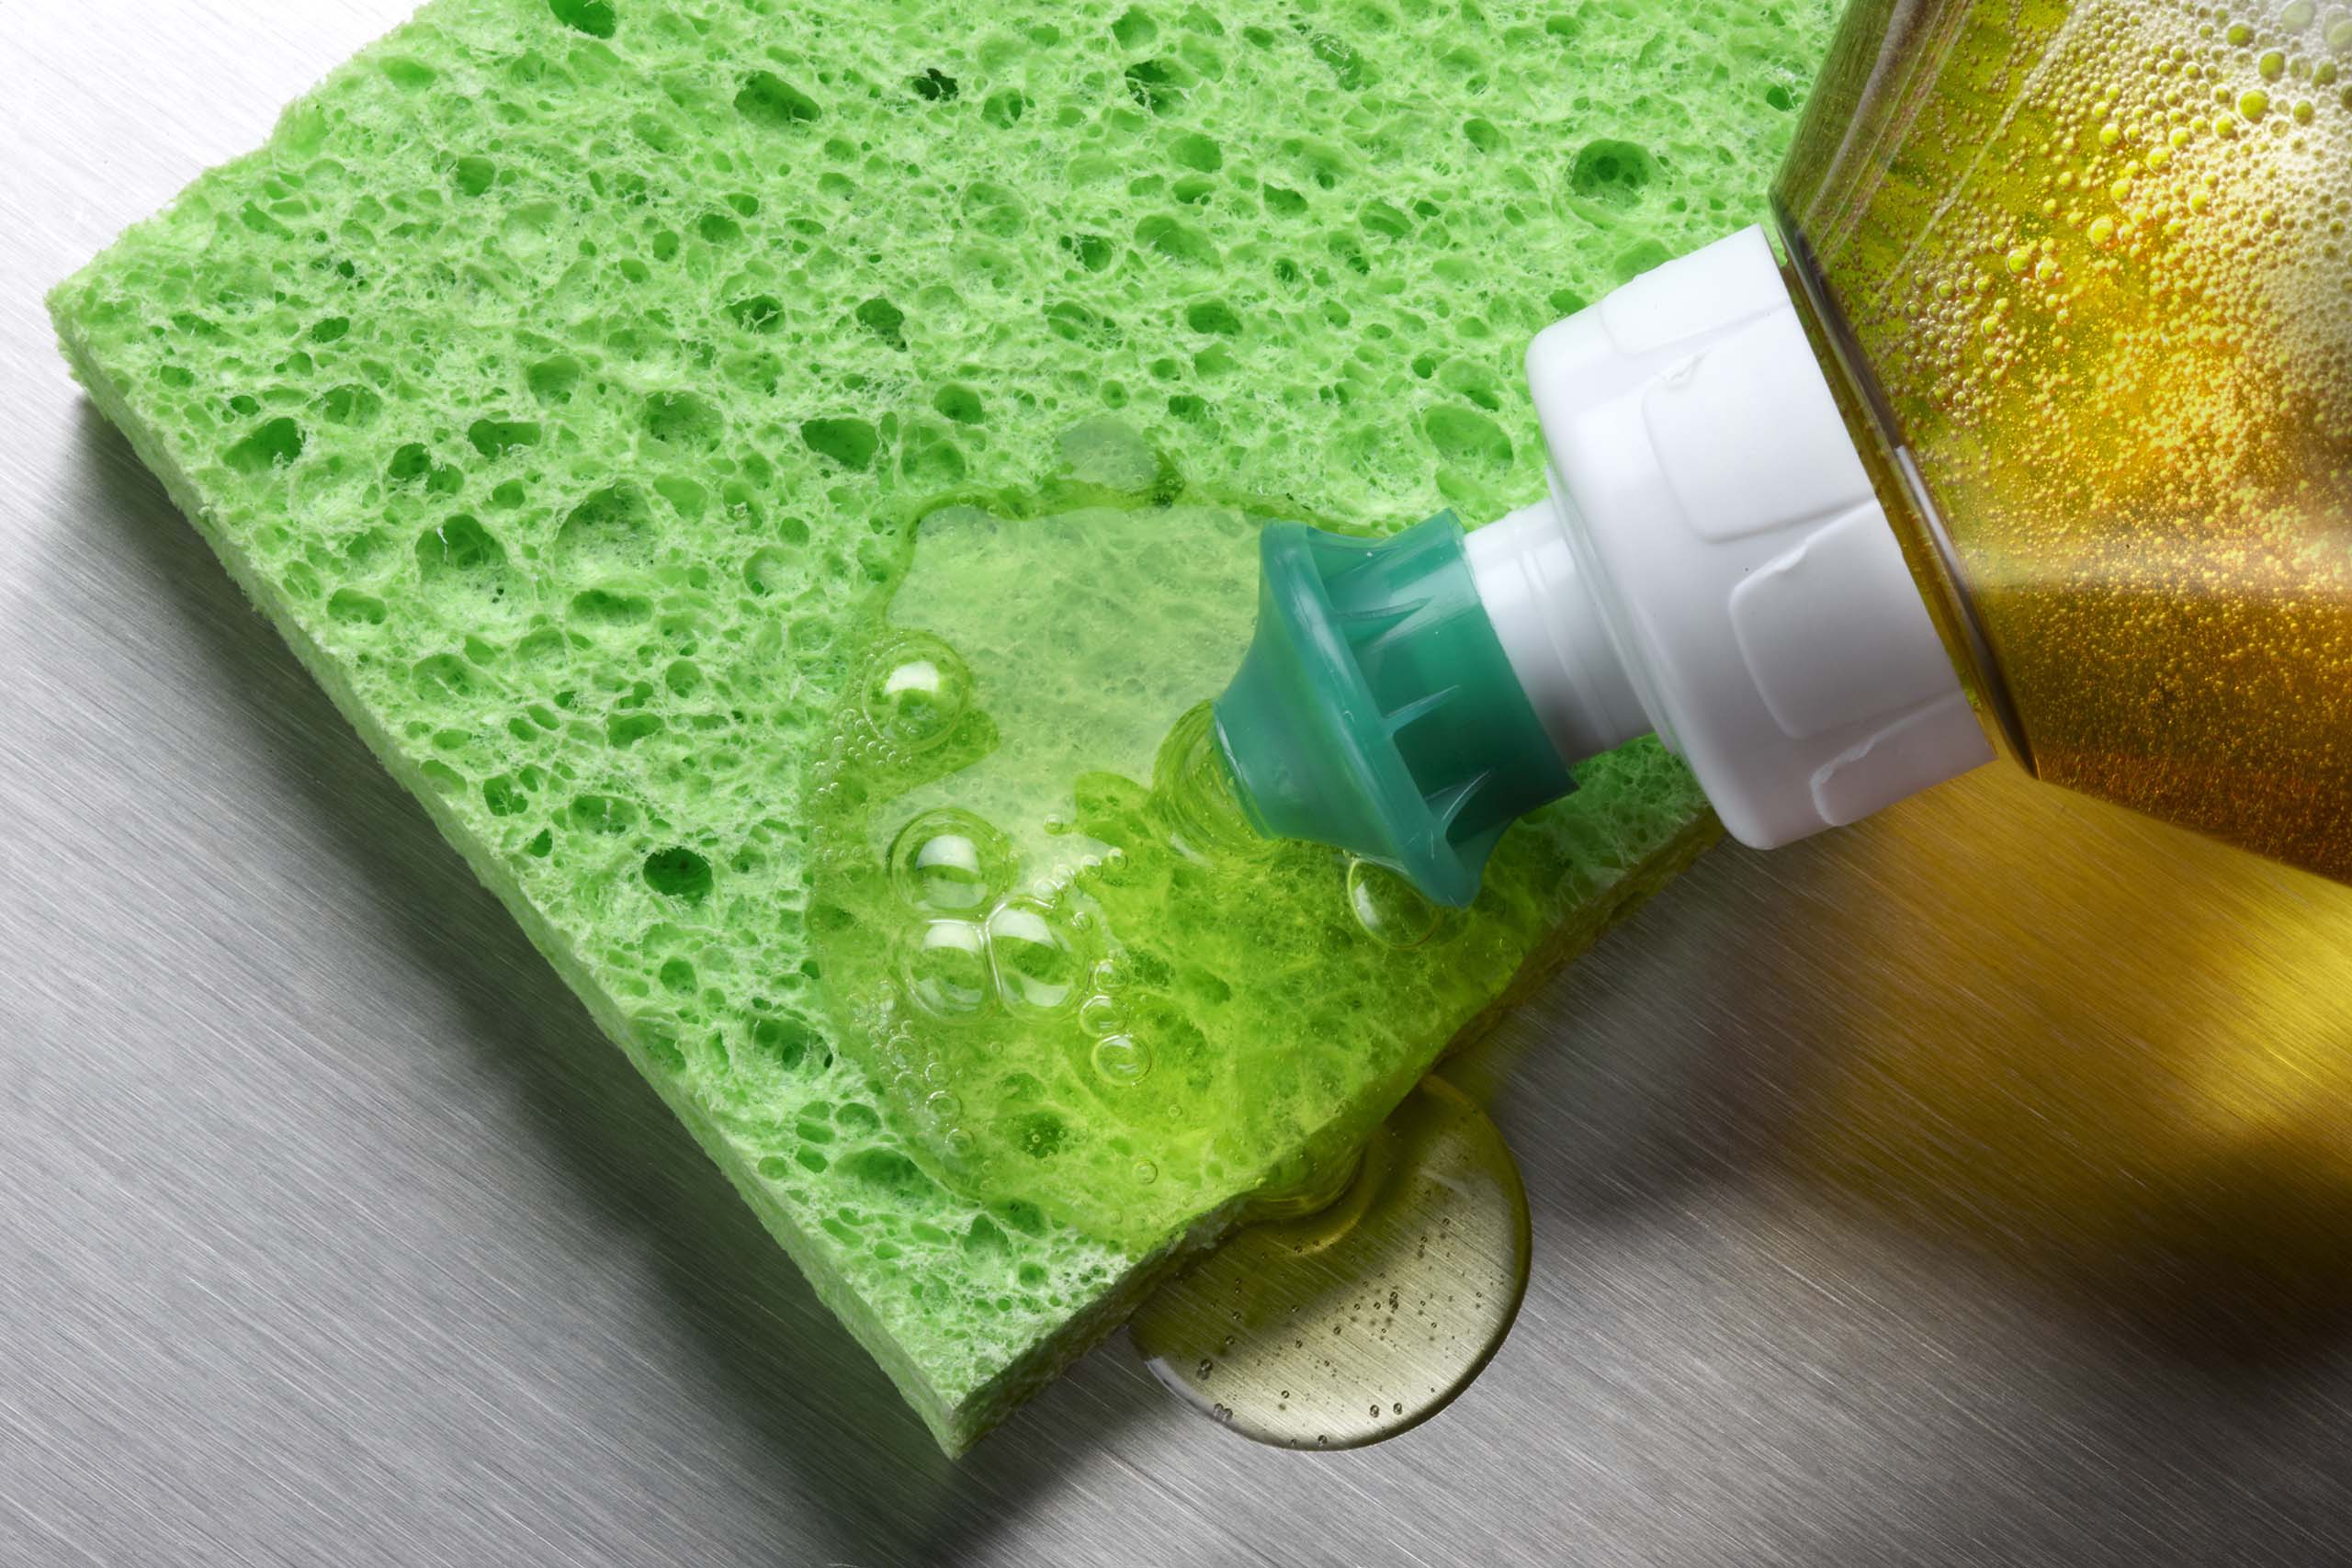 Squirting soap on a green sponge